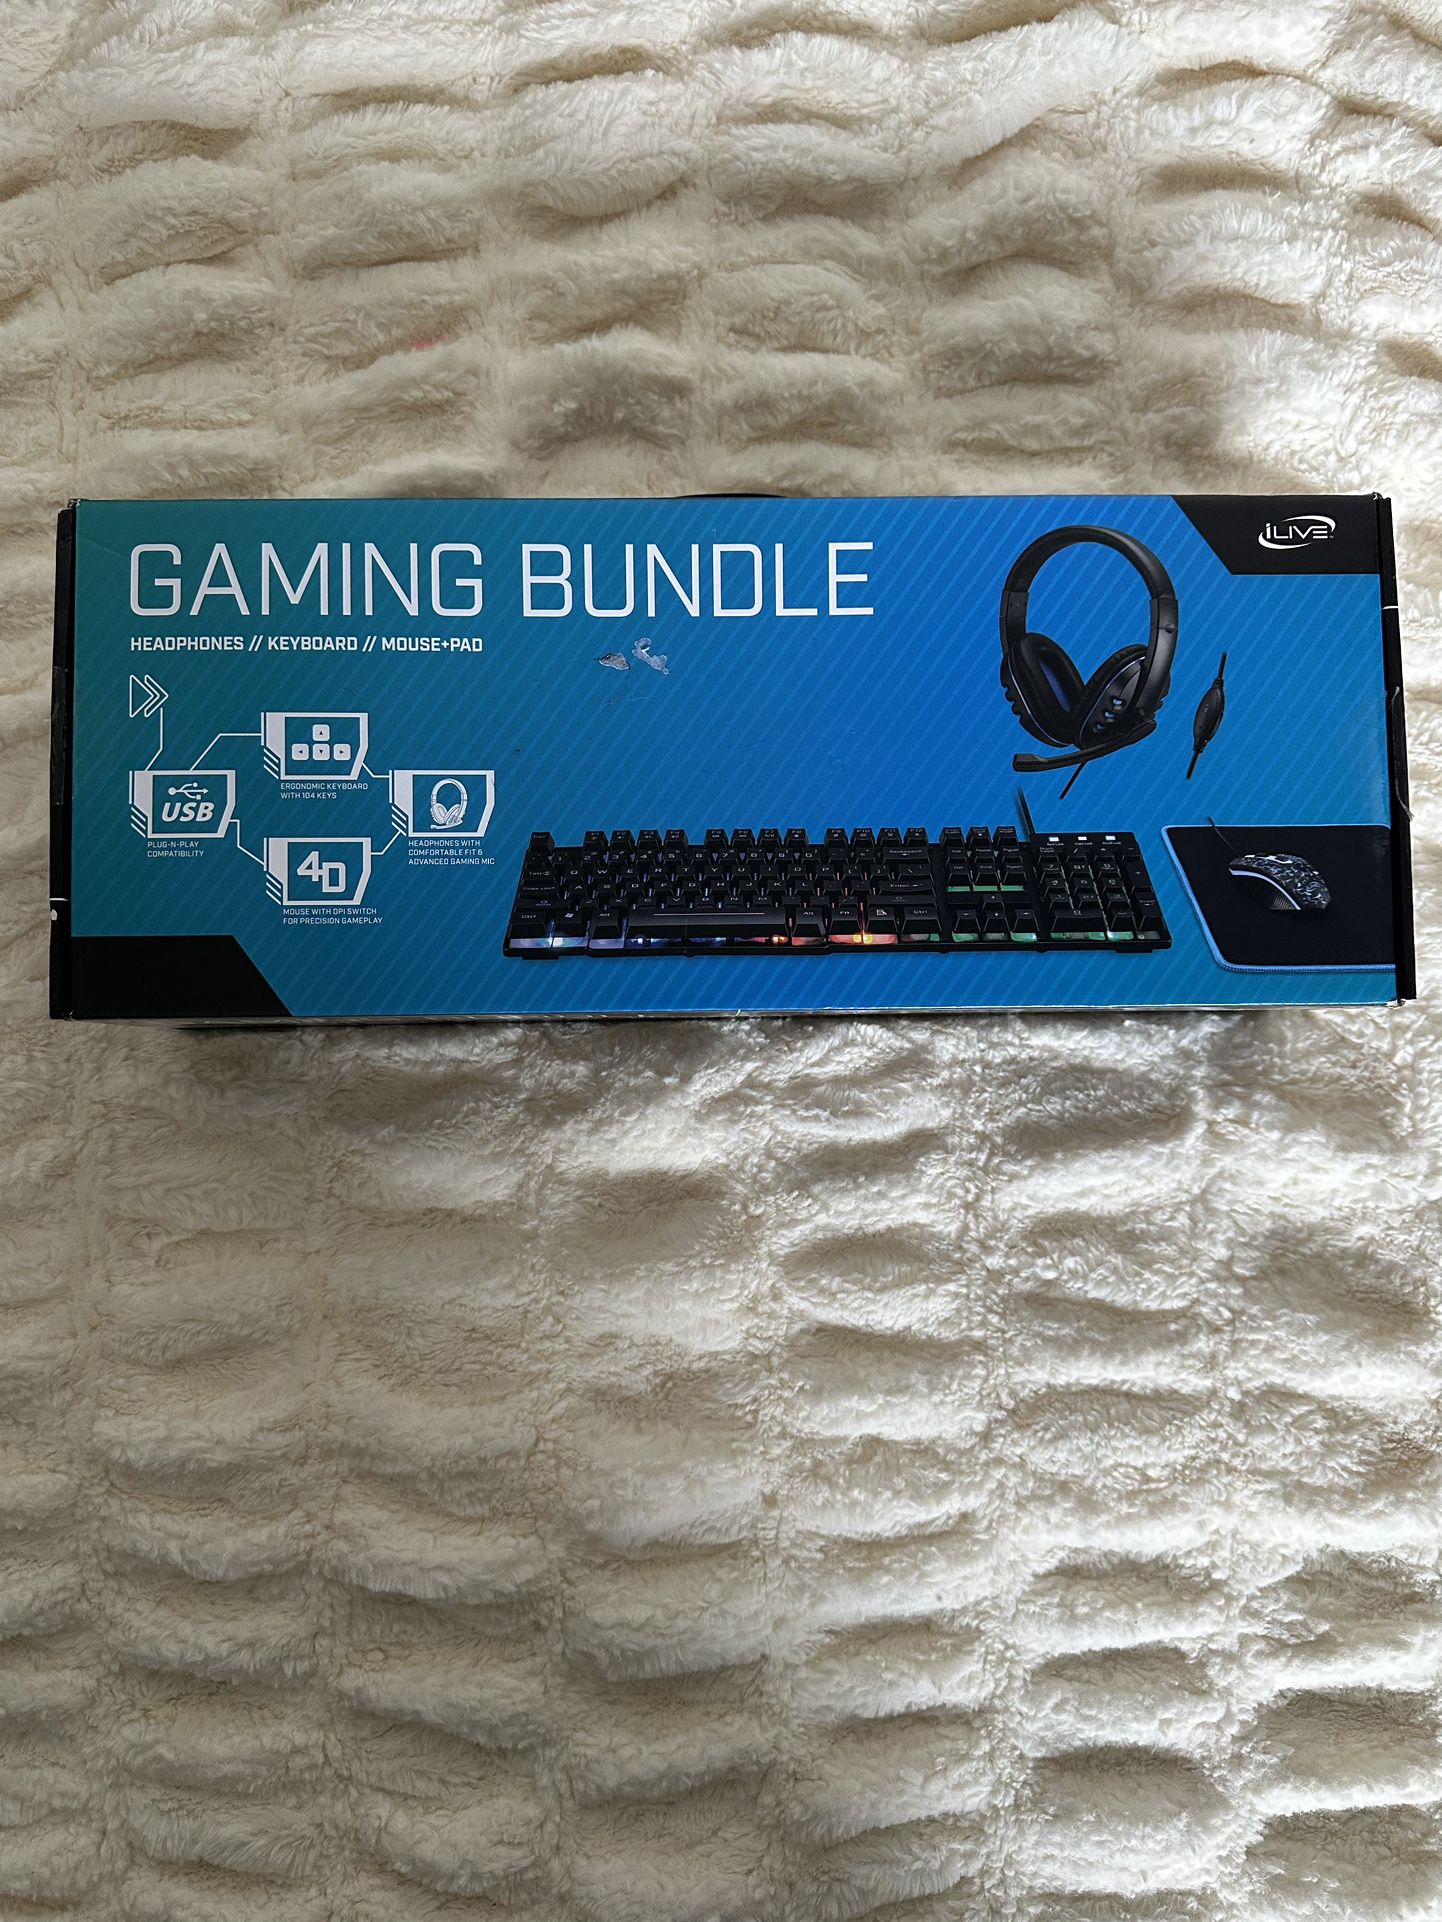 Gaming Bundle Includes: Wired Keyboard, Wired Gaming Mouse & Mousepad, Wired Gaming Headphones. 